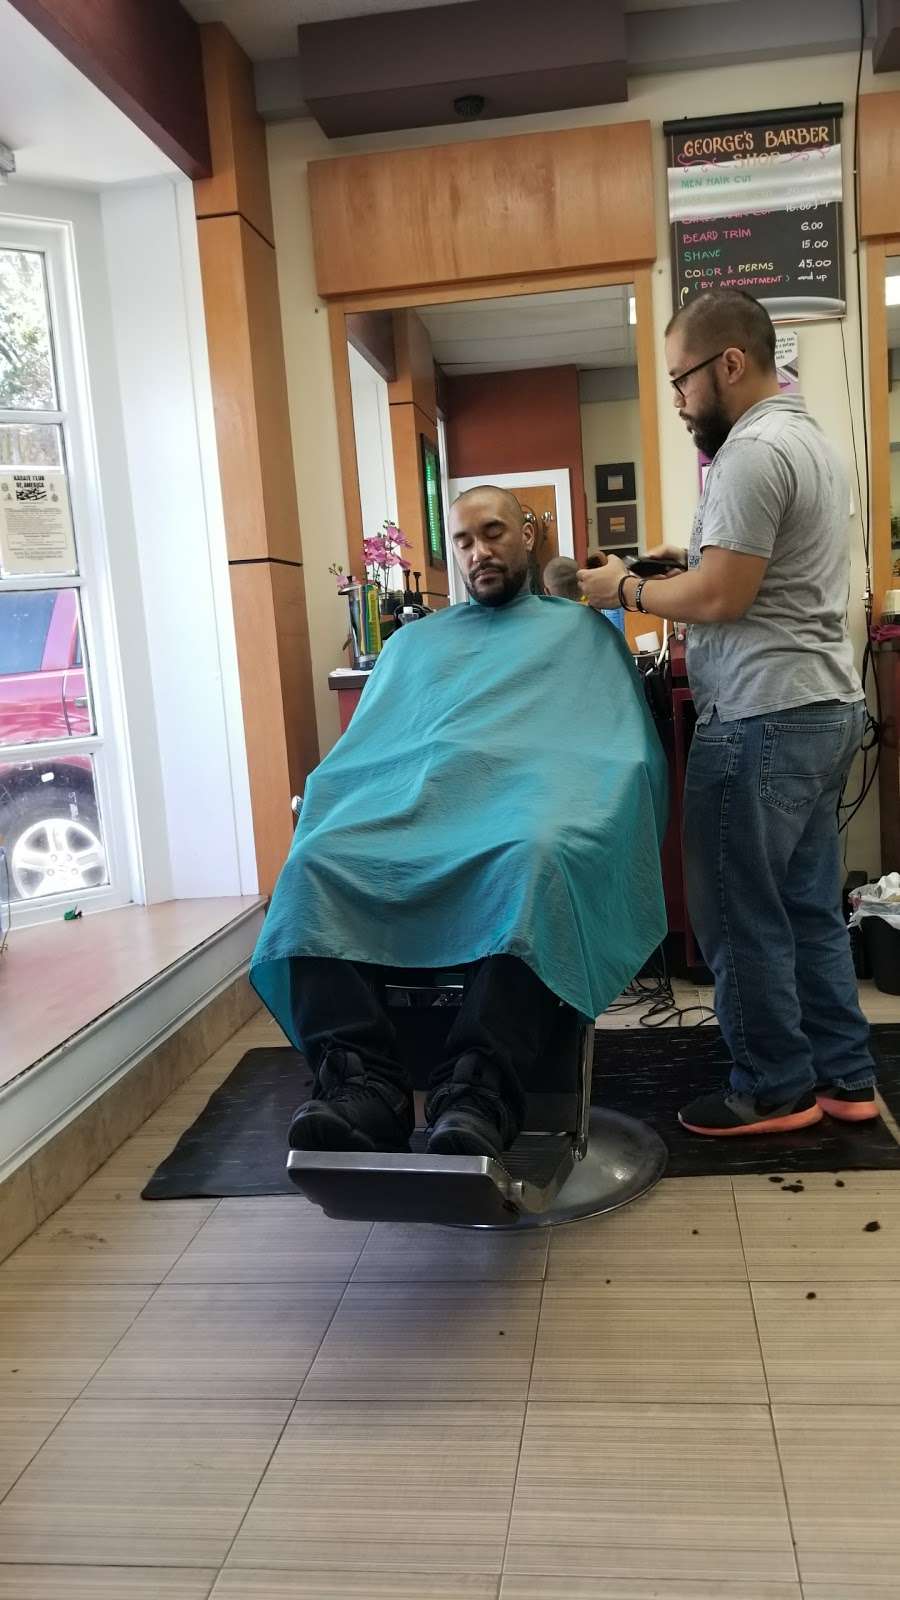 Georges Barber Shop | Photo 2 of 3 | Address: 532 Forest Glen Rd, Silver Spring, MD 20901, USA | Phone: (301) 681-1576